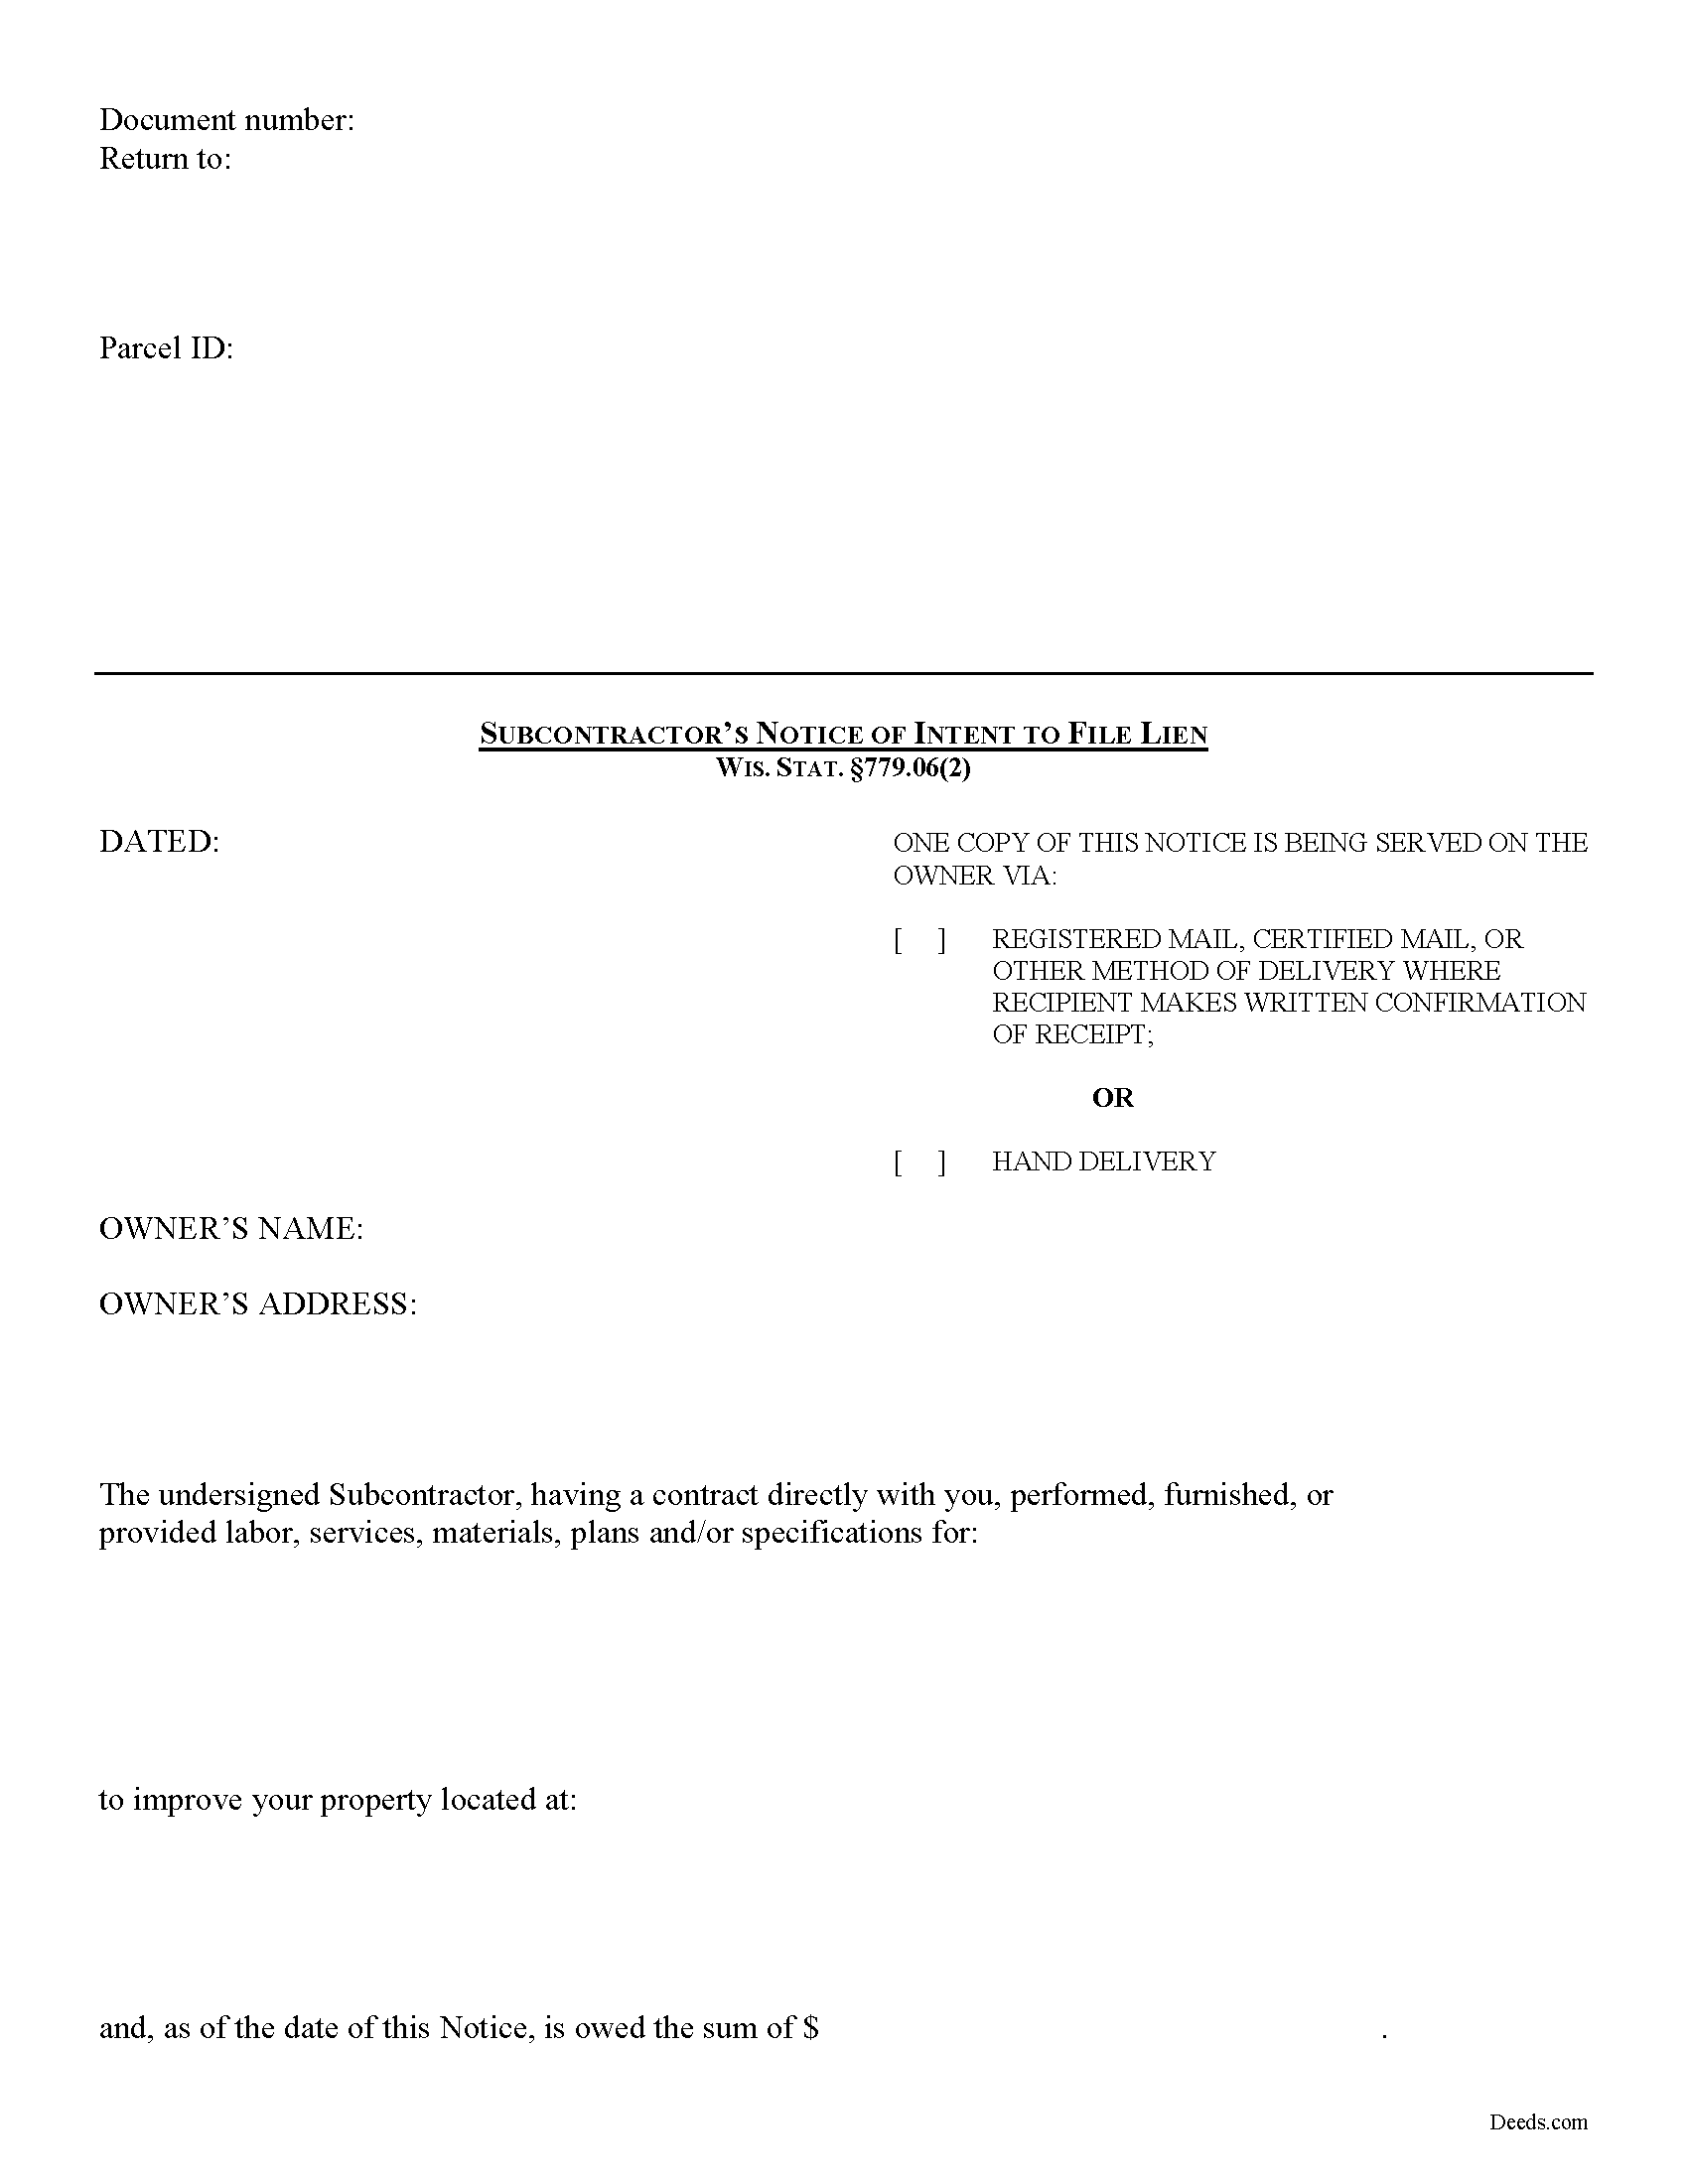 Subcontractor Notice of Intent to File Lien